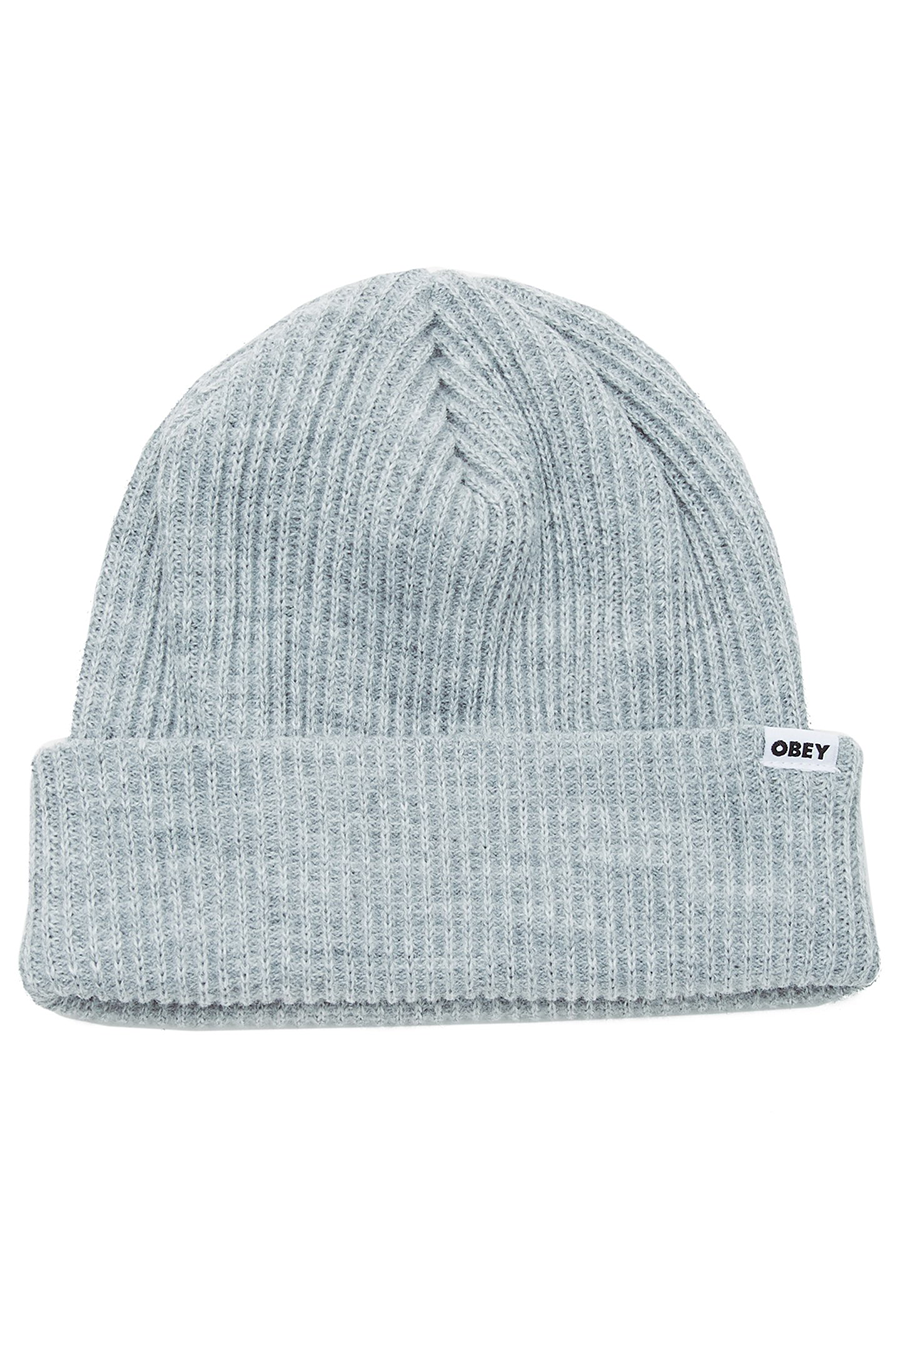 Bold Beanie | Heather Grey - Main Image Number 1 of 1